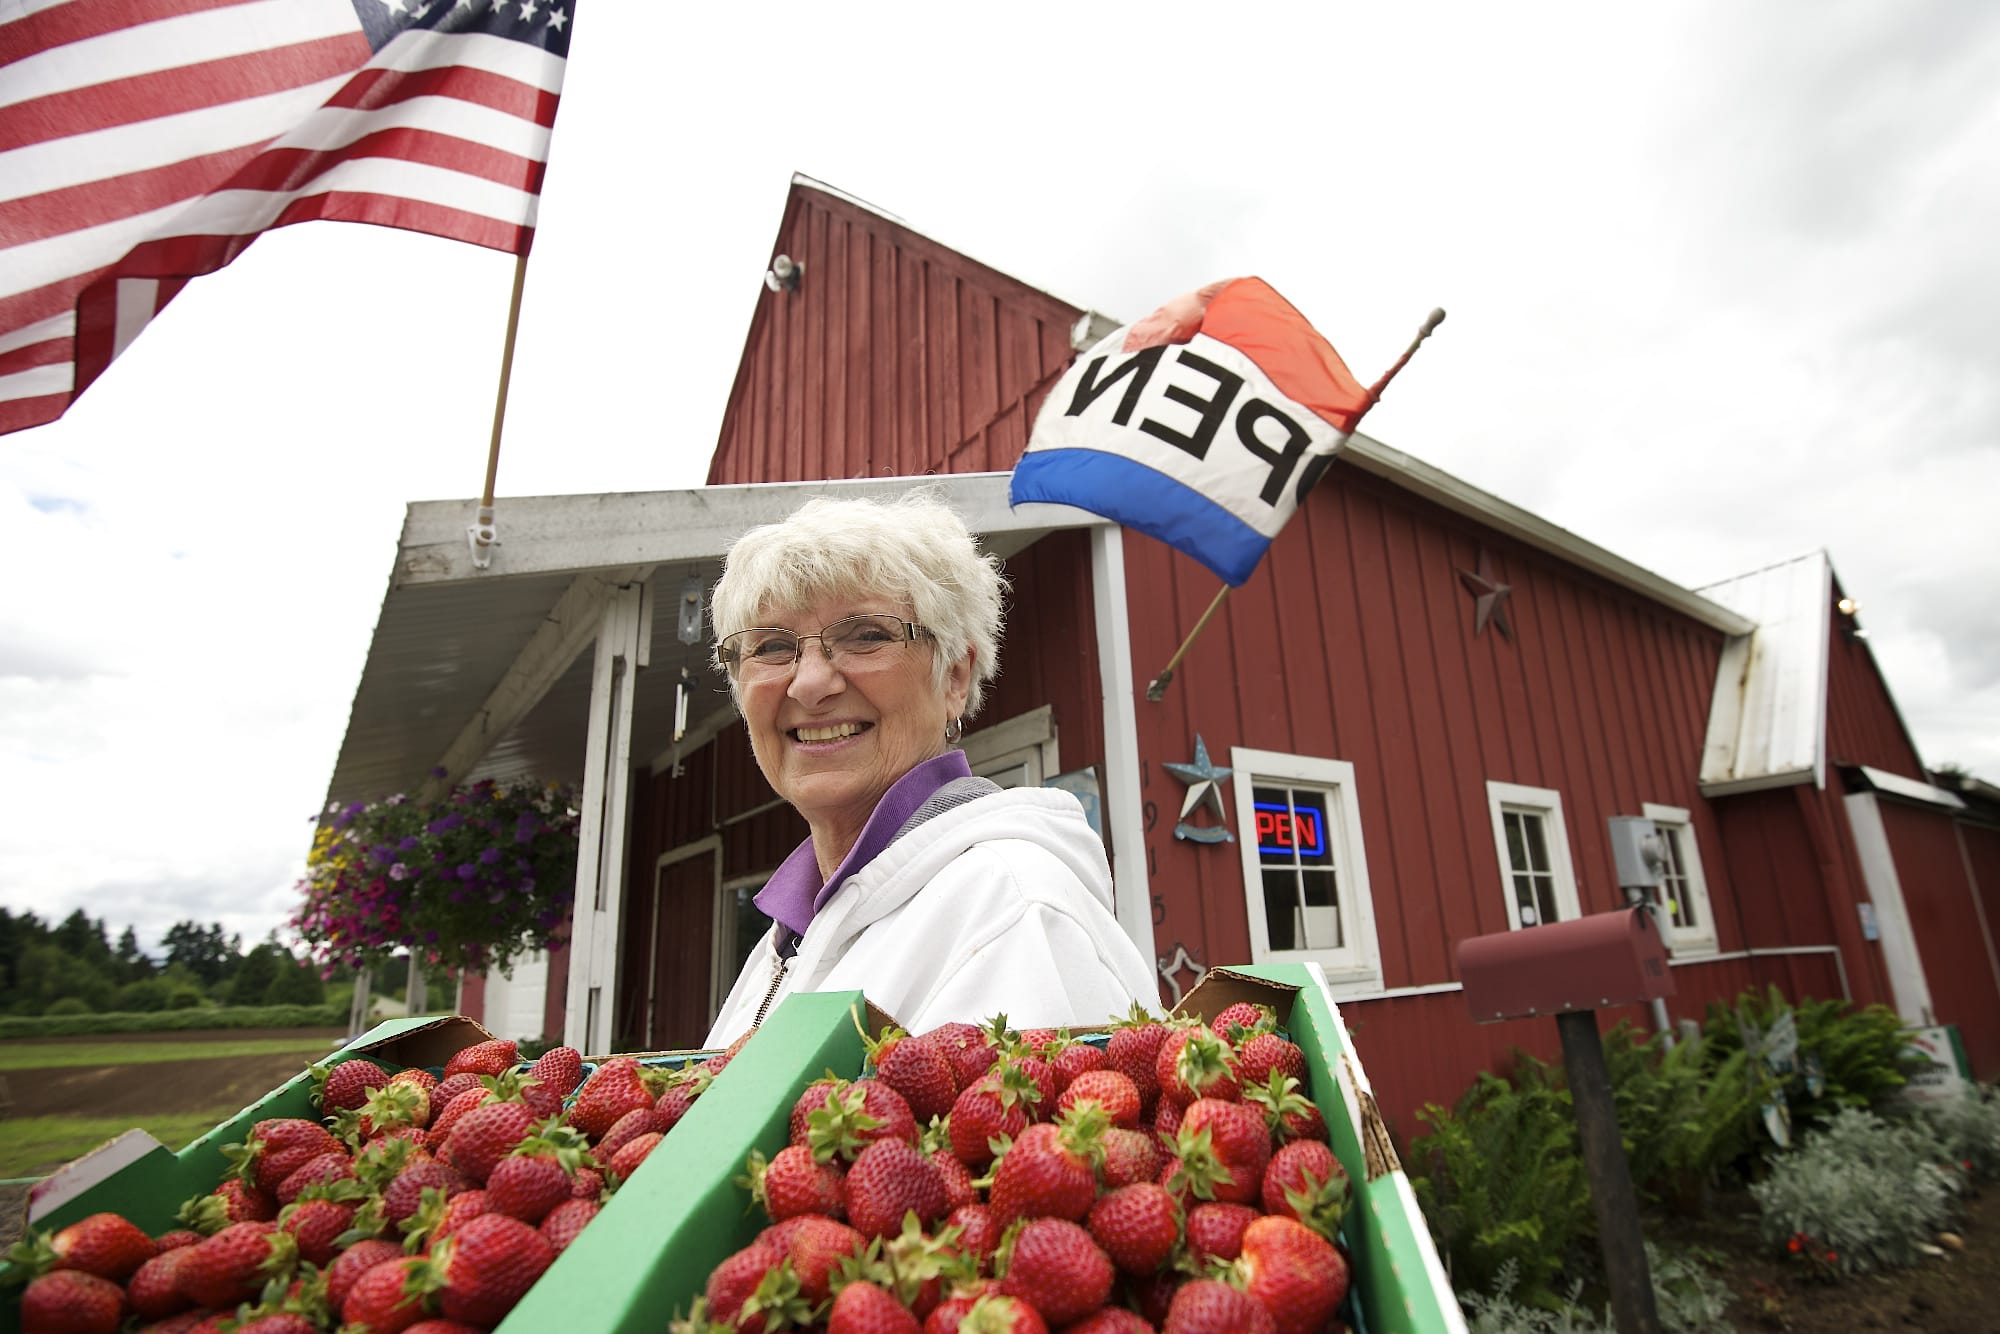 Carol Hoffman, owner of Red Barn, holds a flat of Hood strawberries outside her business in May in Vancouver. &quot;The customers prefer the Hood flavor,&quot; said Hoffman.